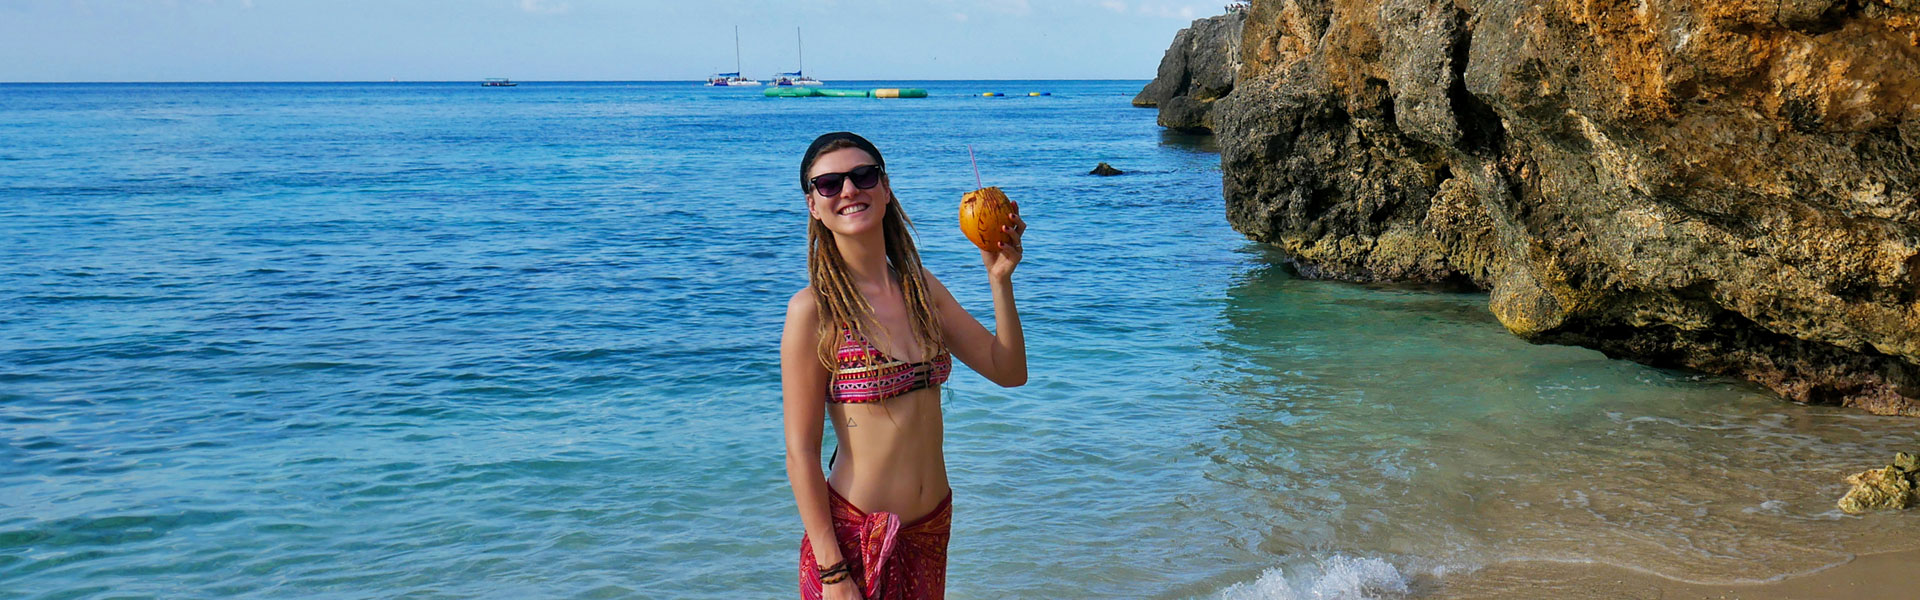 Rasta girl with coconut at beach in Montego Bay, Jamaica